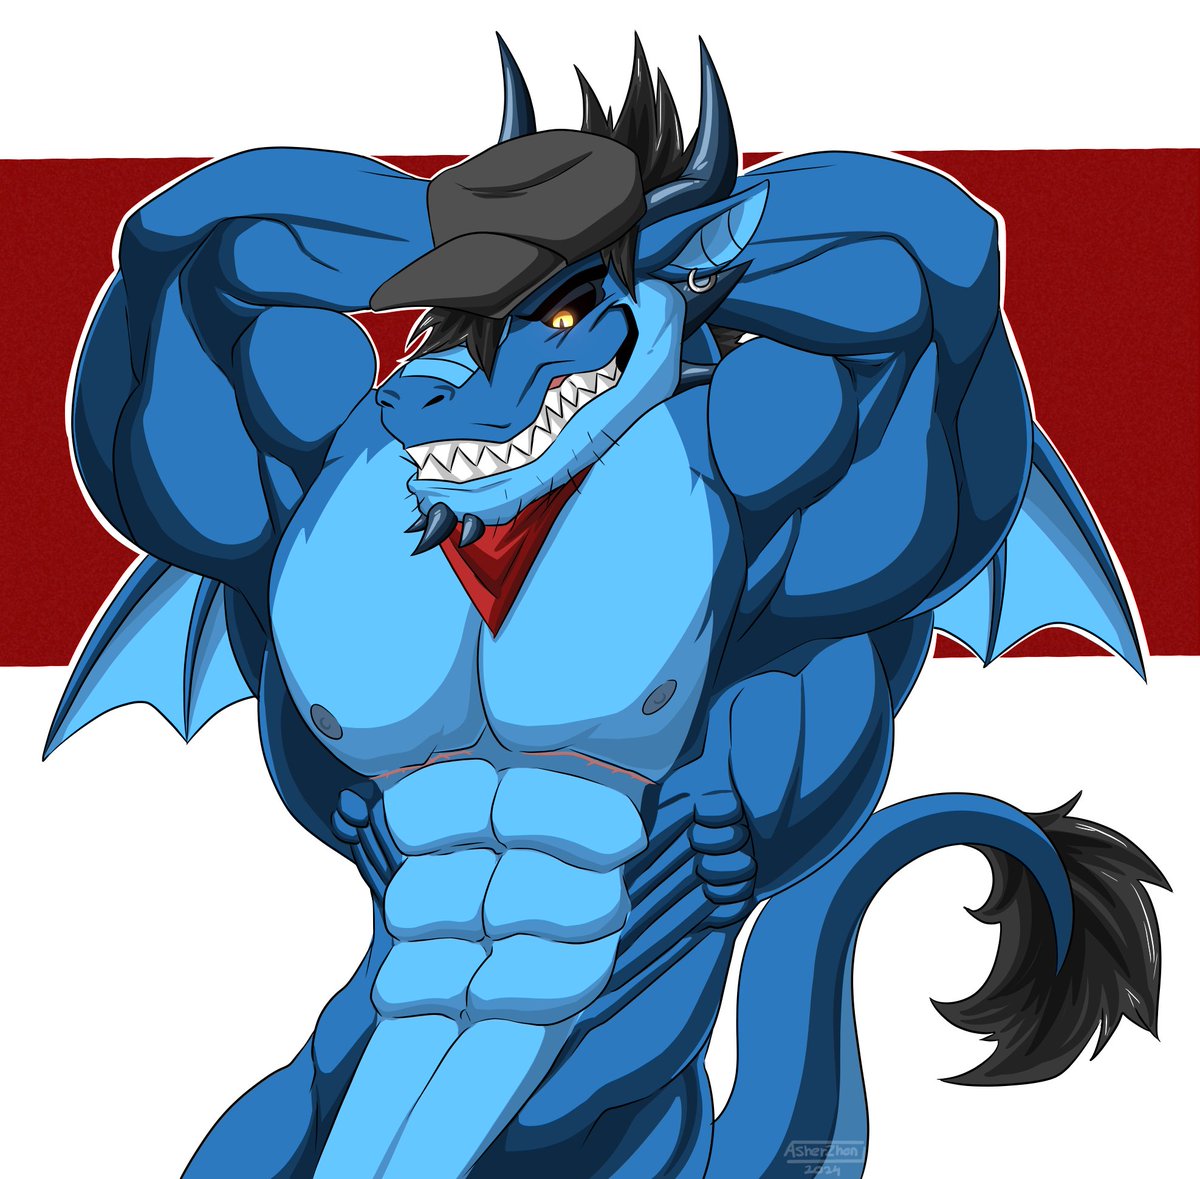 last art before i get hella busy on 10th x'D see ya next week or whenever i am free from the guests :') ofc along with the commissions on mid April! enjoy the blue derg~